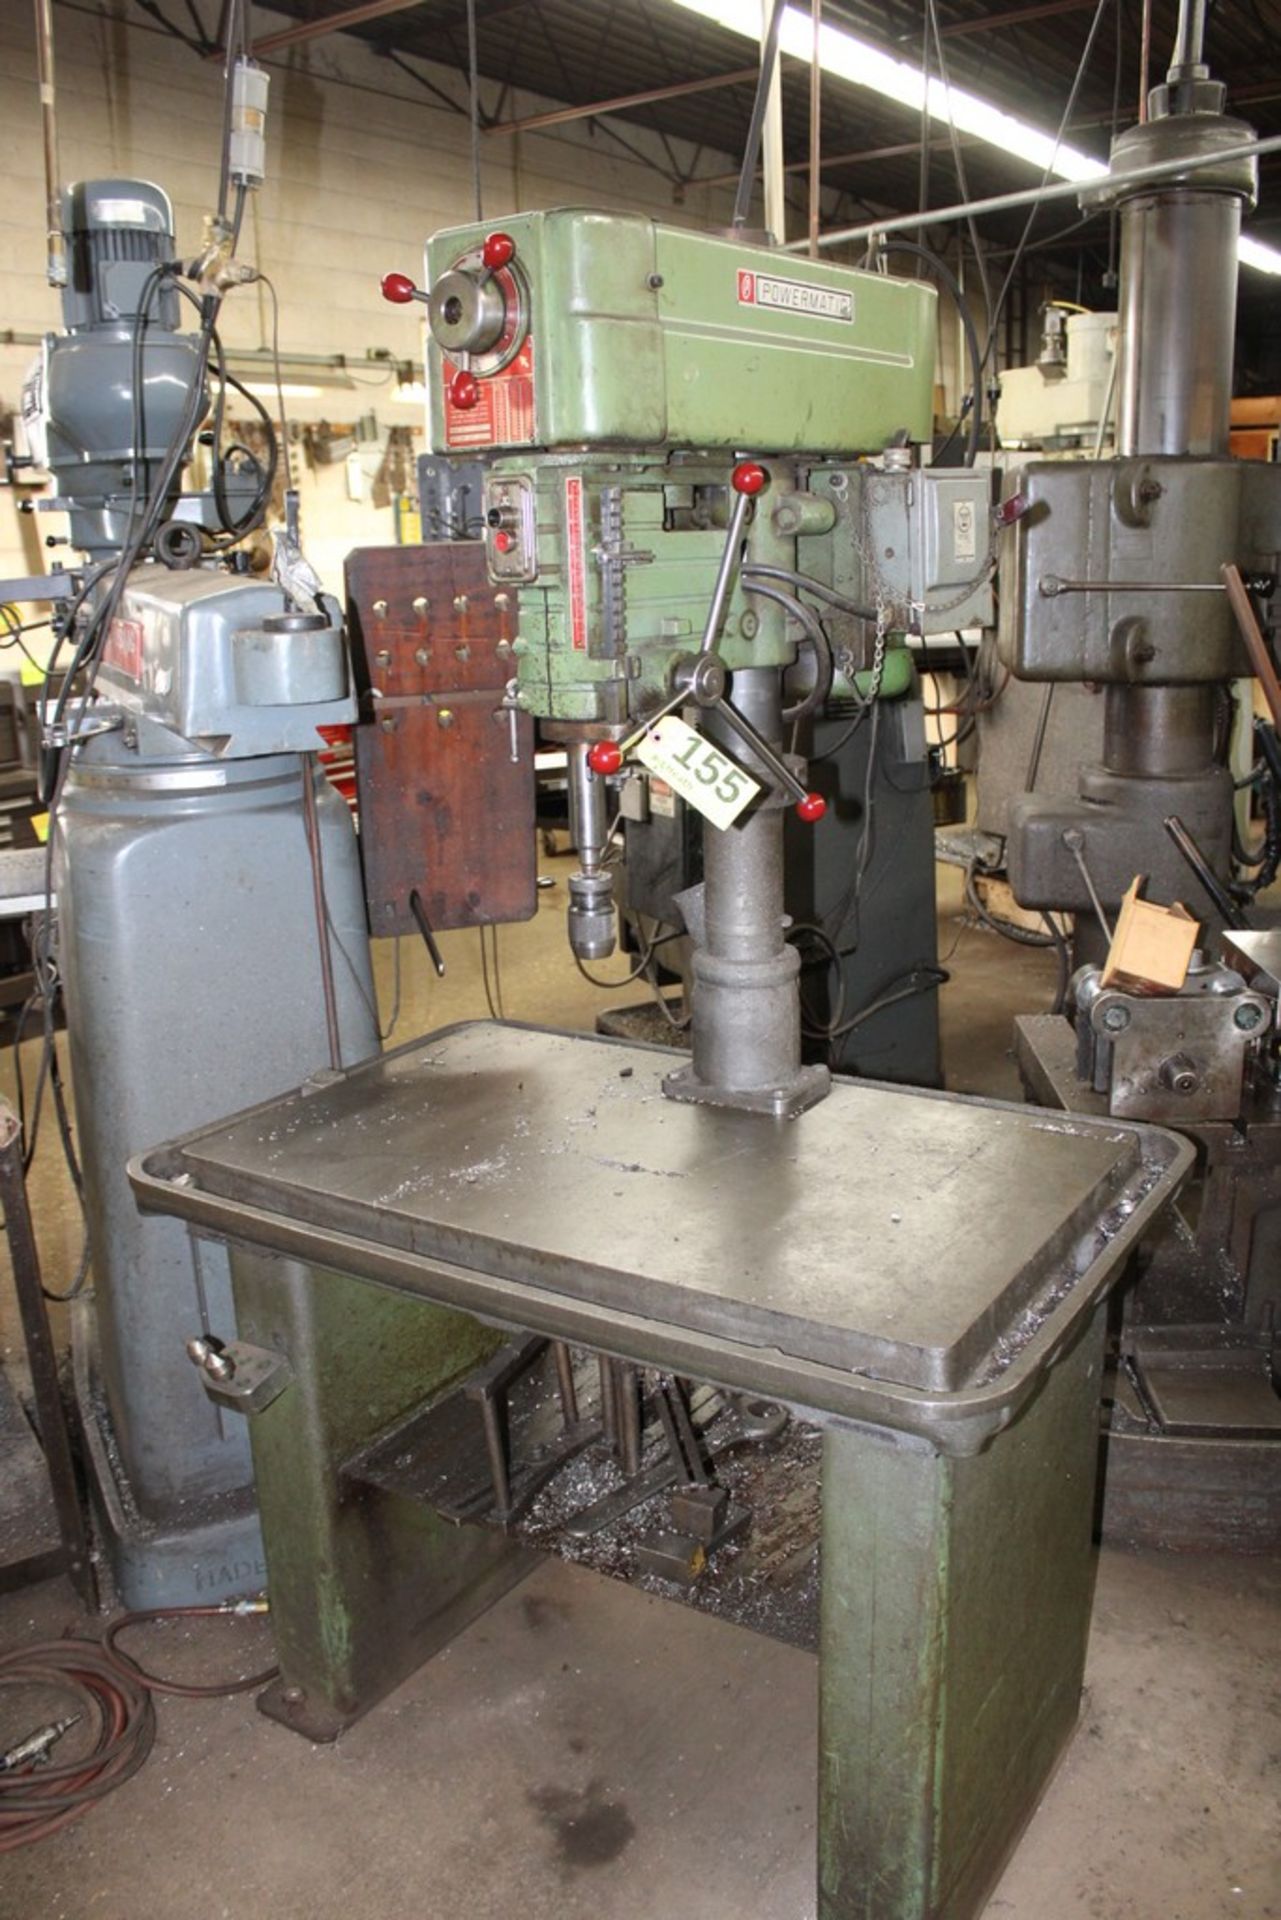 POWERMATIC 20" MODEL 1200 VARIABLE SPEED DRILL,40" X 24" PRODUCTION WORK TABLE - Image 2 of 6